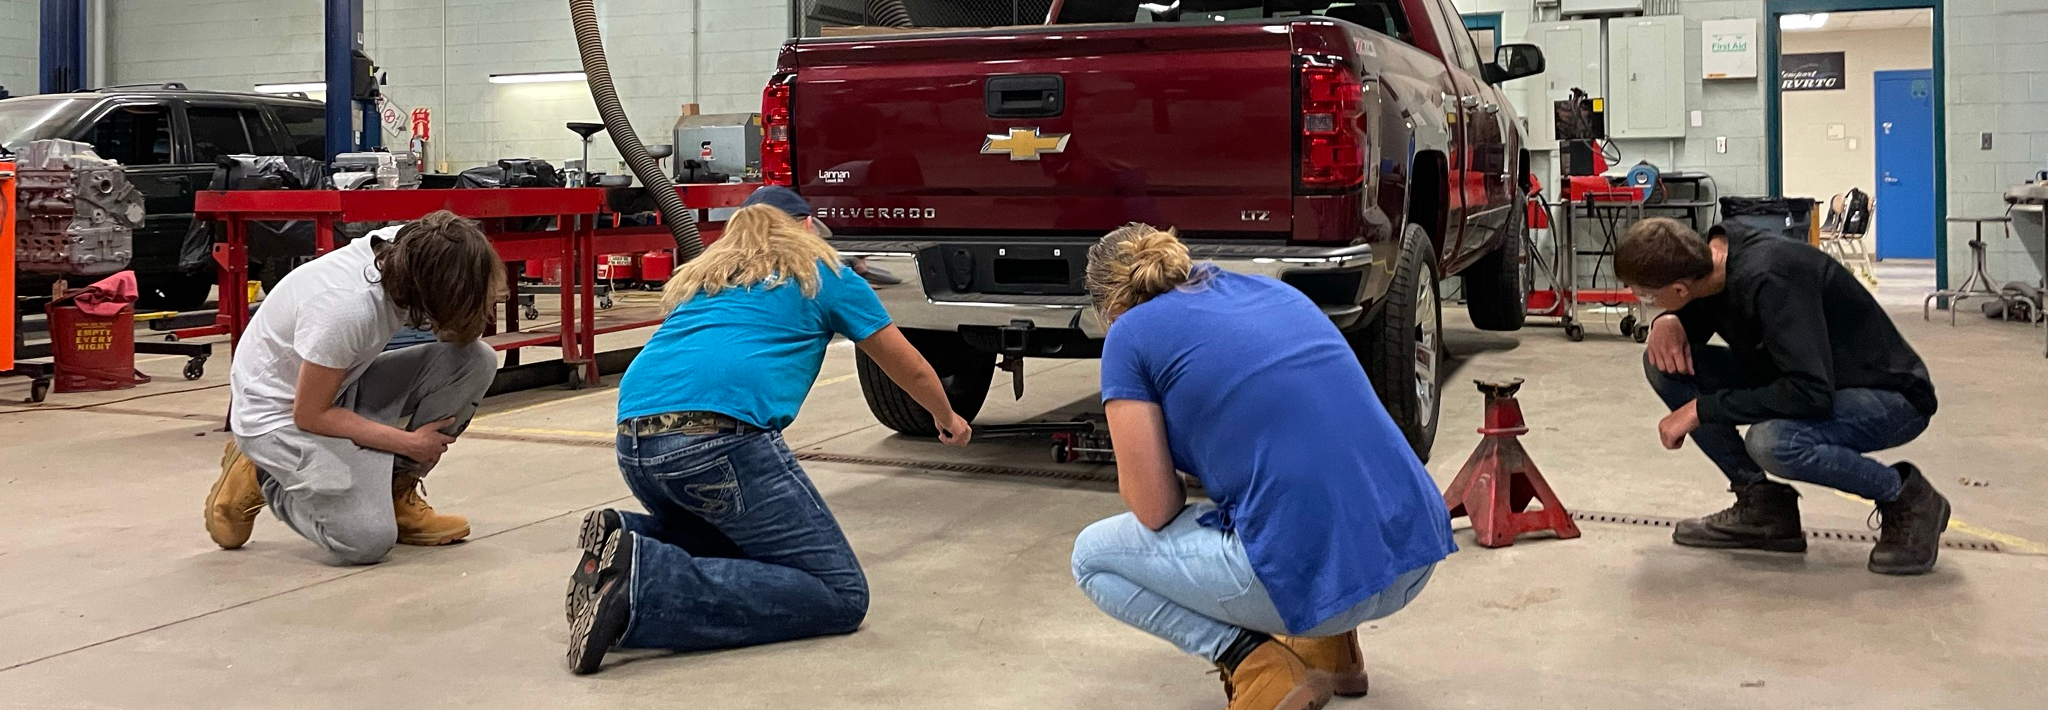 Students looking under truck in Auto lab